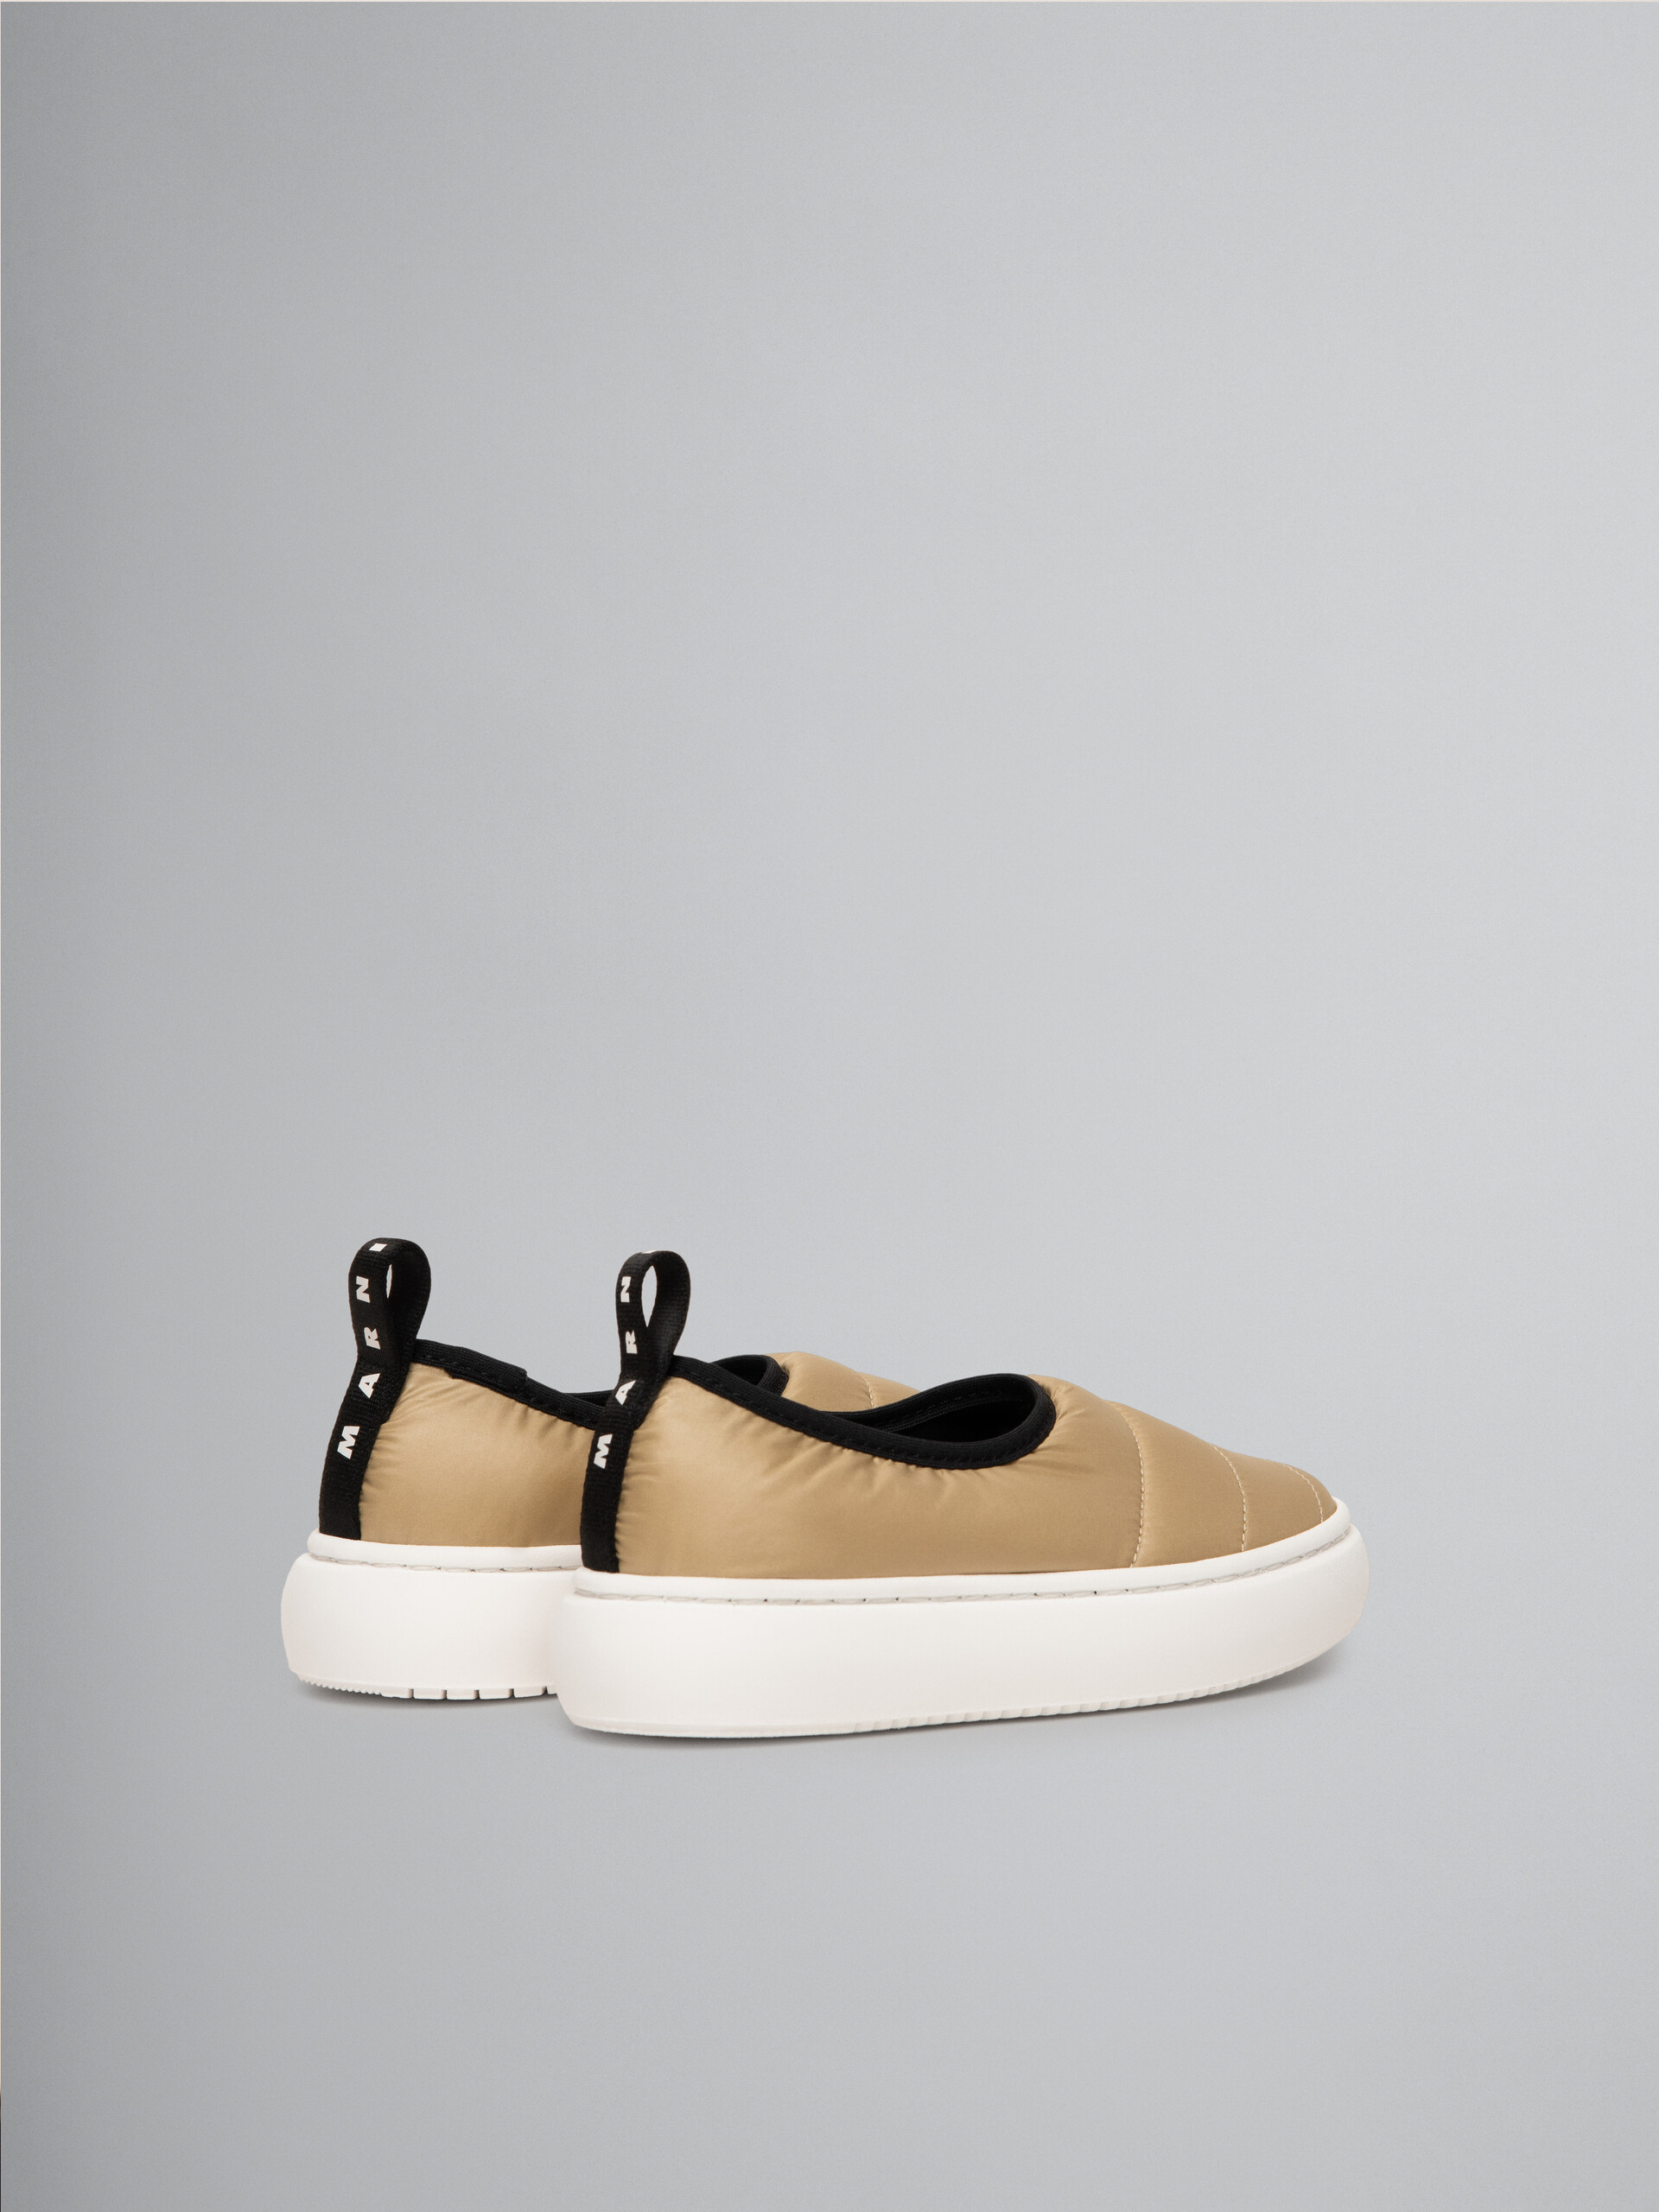 Beige padded nylon slip-on sneaker - Other accessories - Image 3